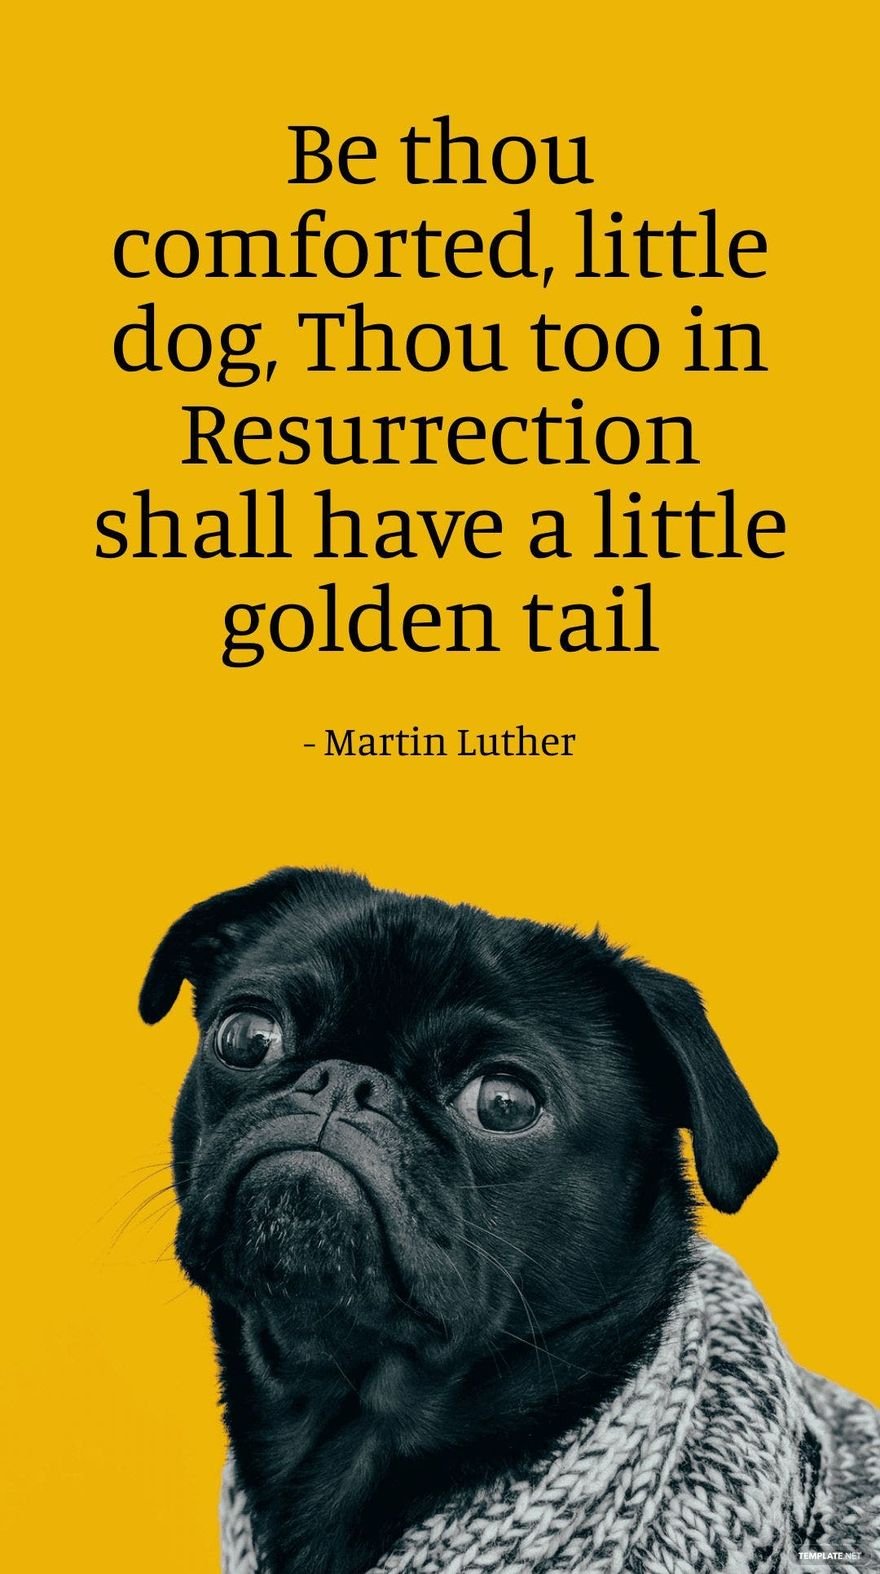 Martin Luther - Be thou comforted, little dog, Thou too in Resurrection shall have a little golden tail